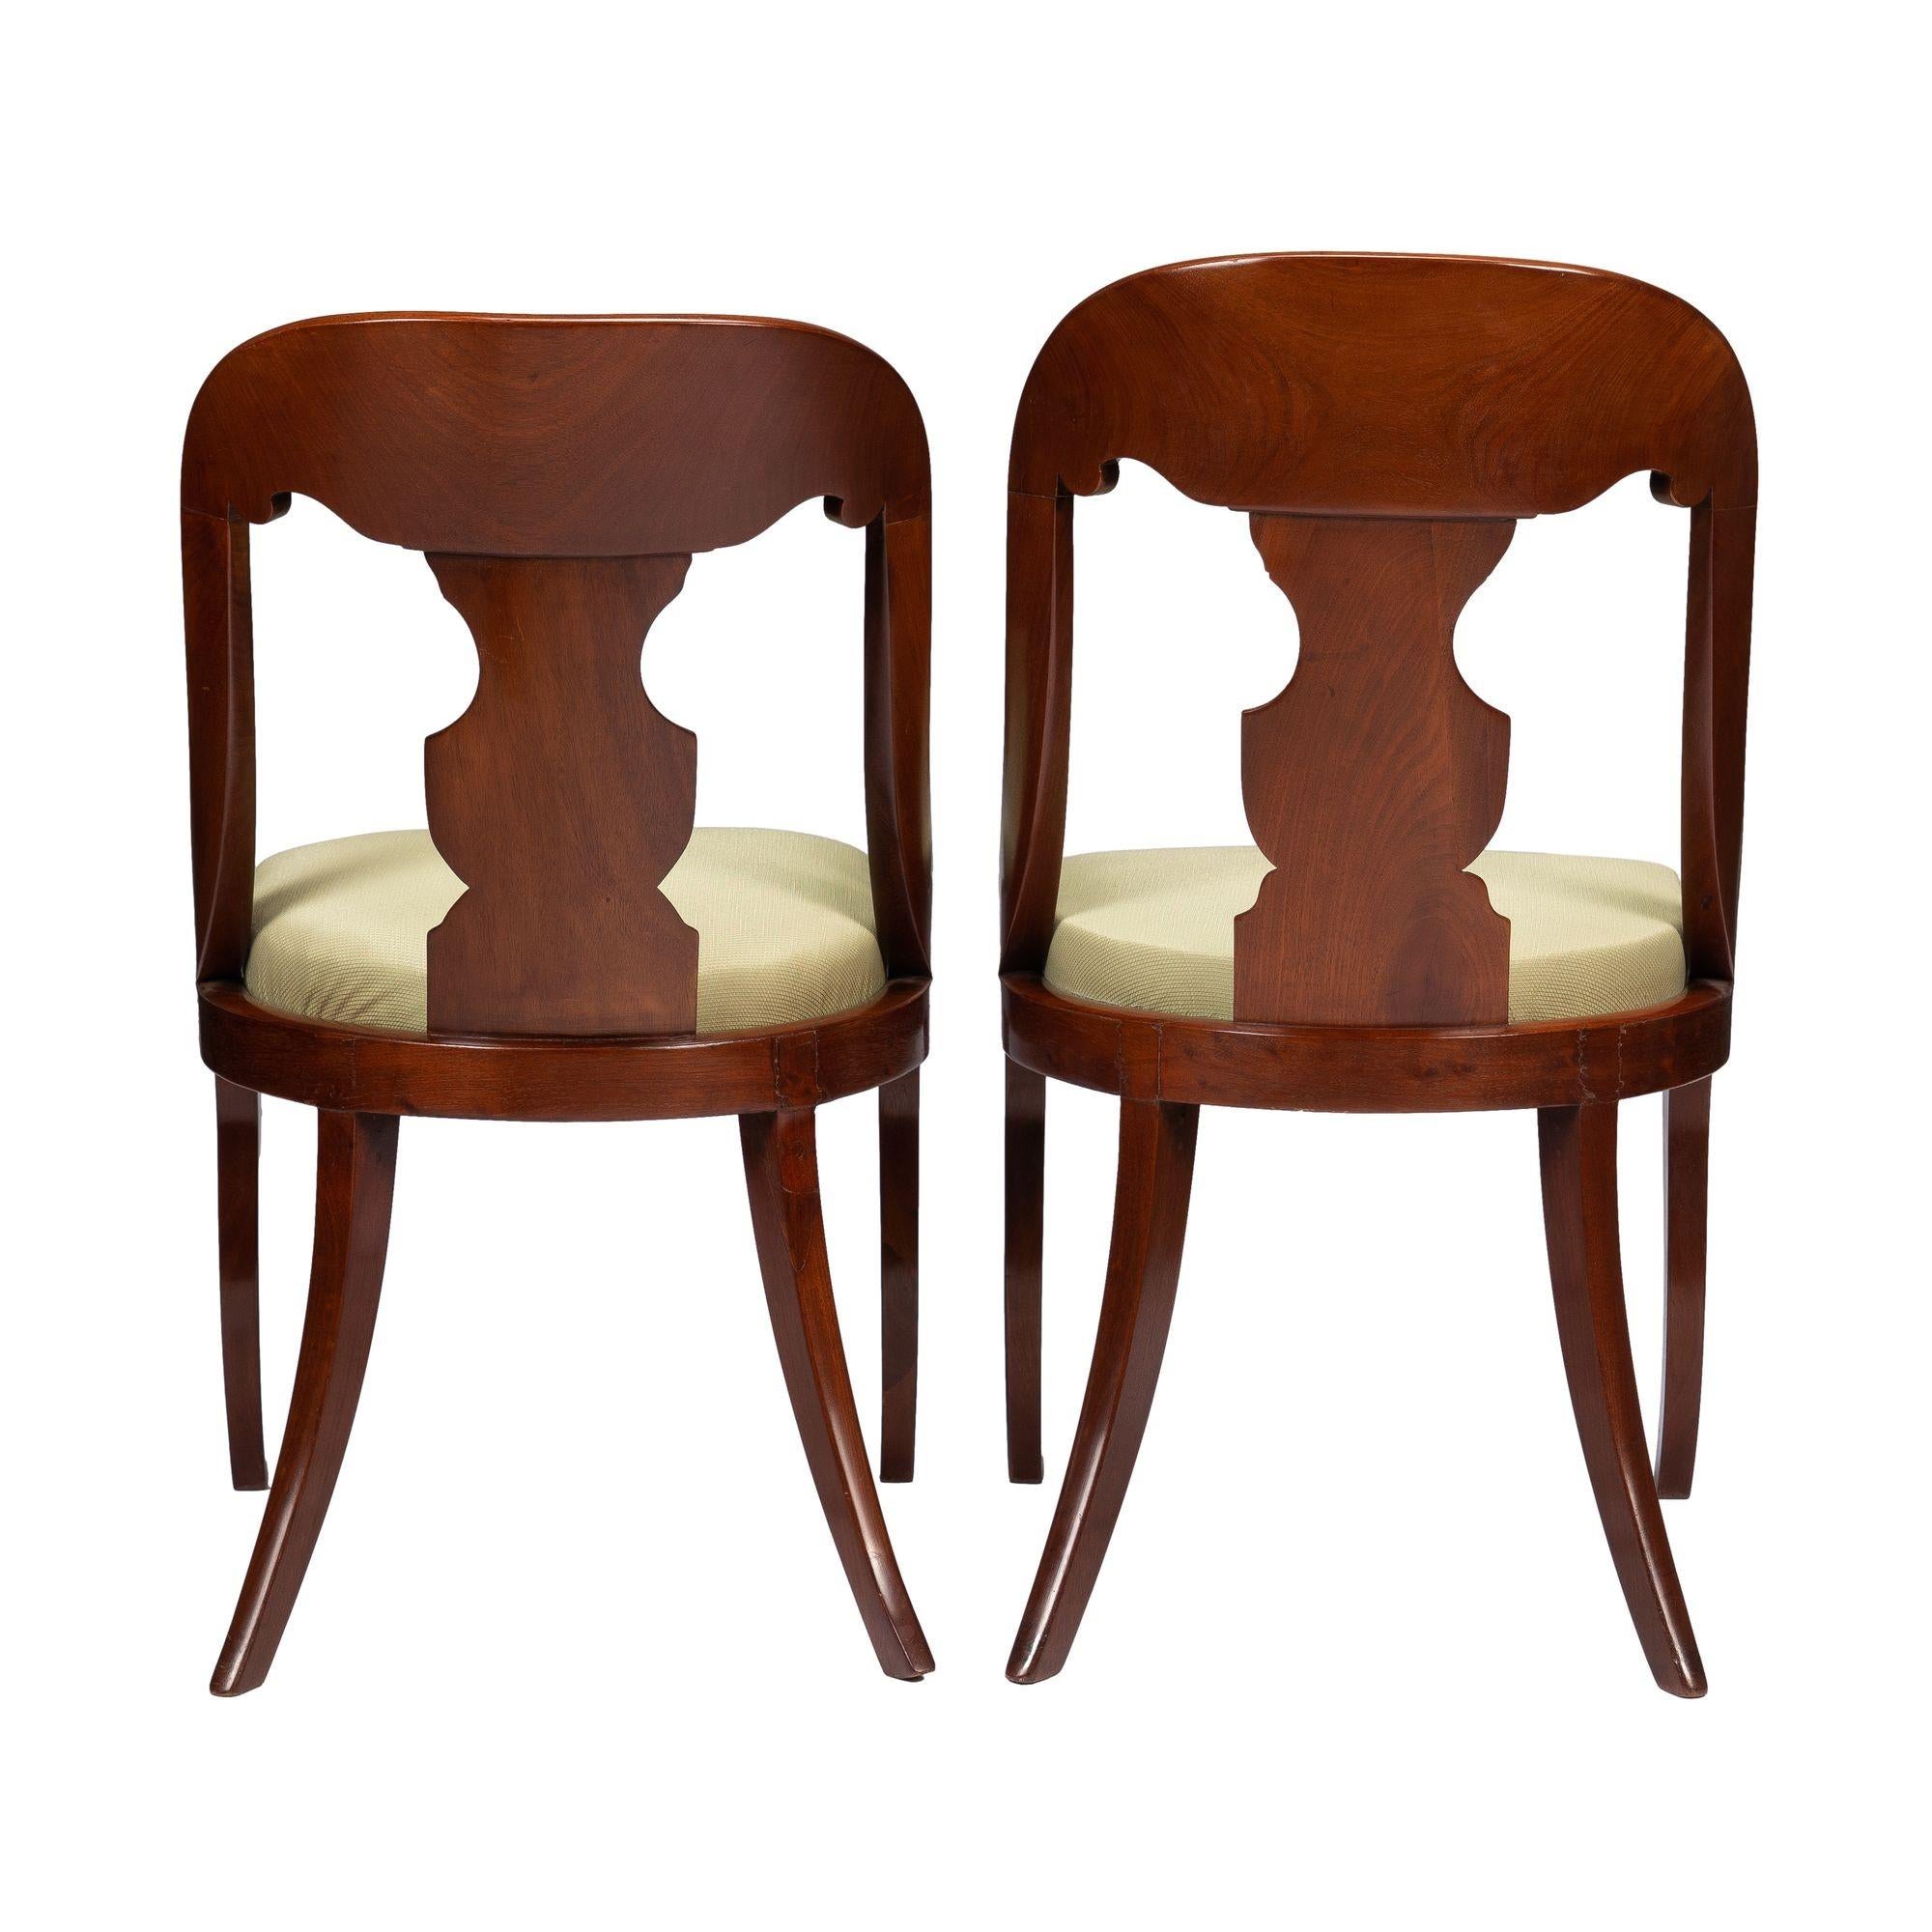 Pair of American Mahogany Gondola Chairs, 1815-35 For Sale 3